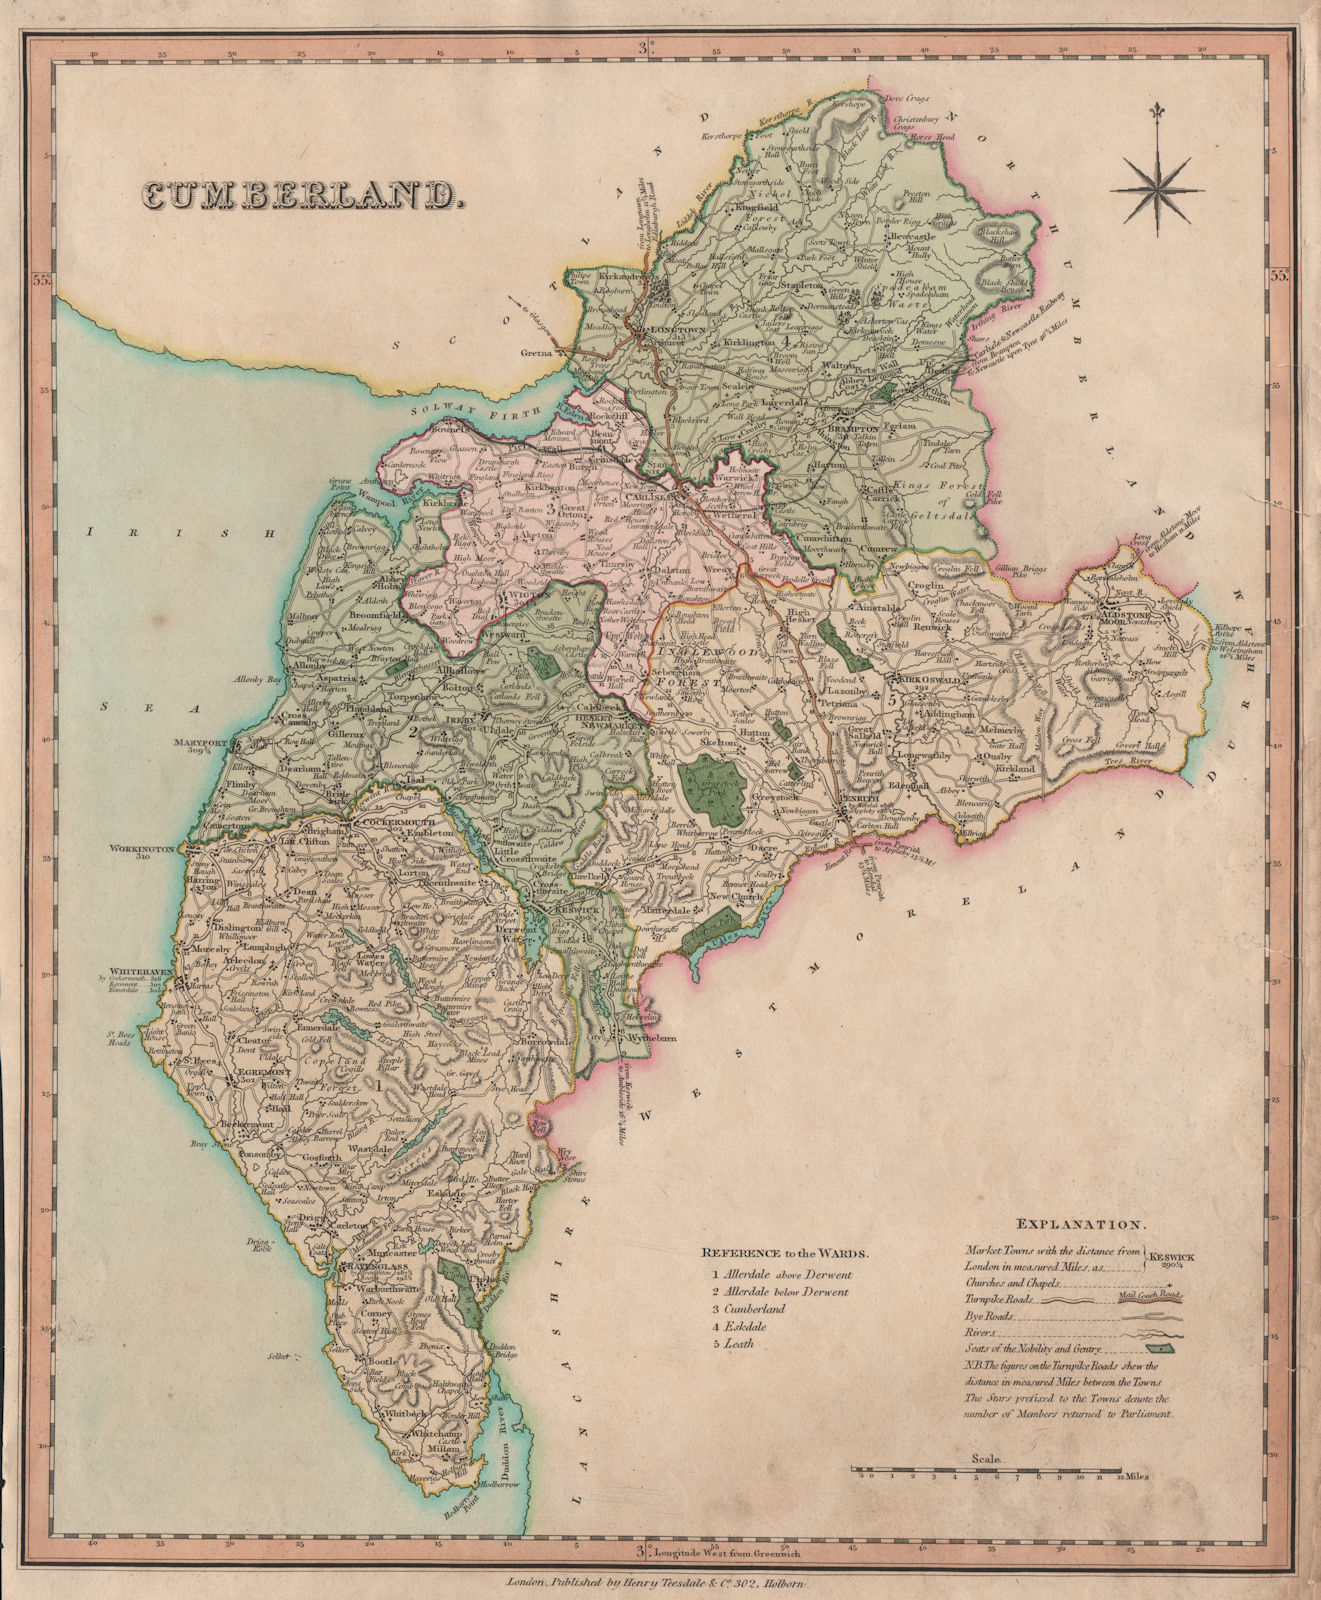 Antique county map of Cumbria by Henry Teesdale. 'Cumberland' 1831 old